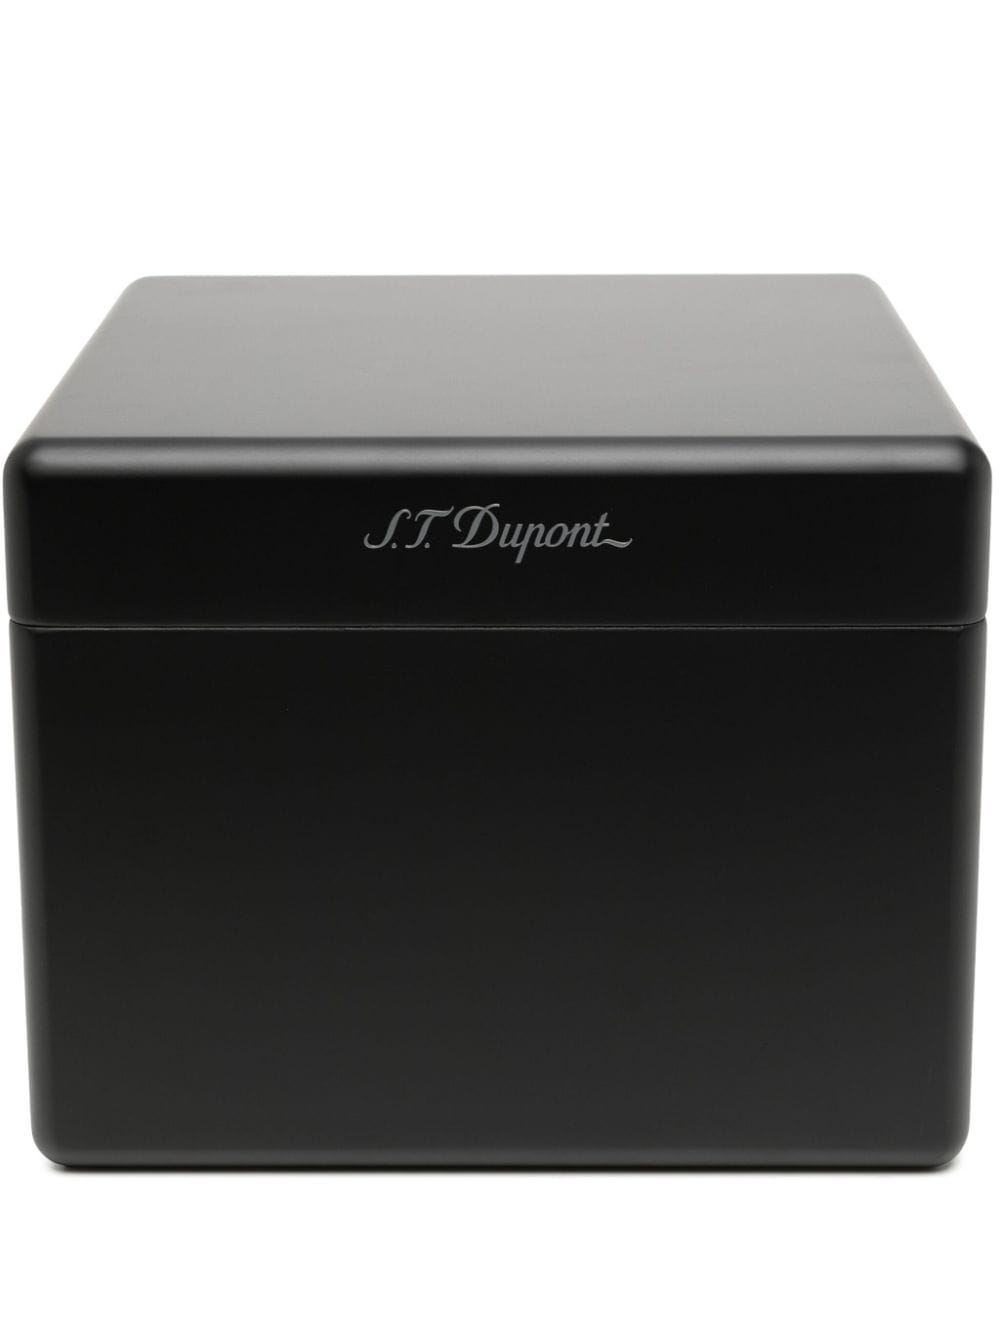 St Dupont Cubic-body Cigar Humidor In Black